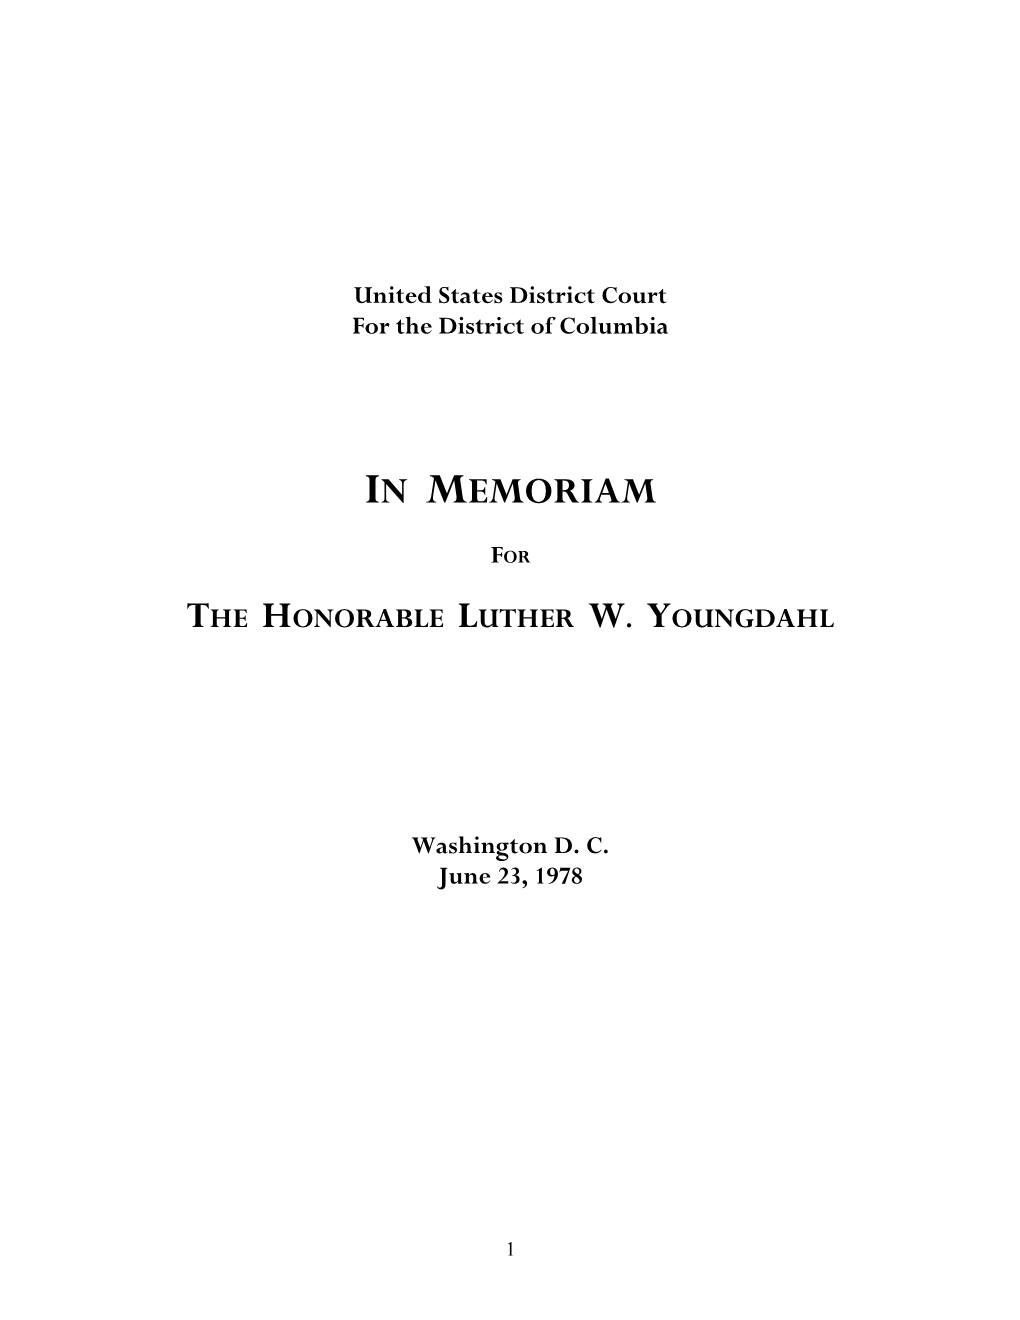 Memorial Proceedings for Luther W. Youngdahl